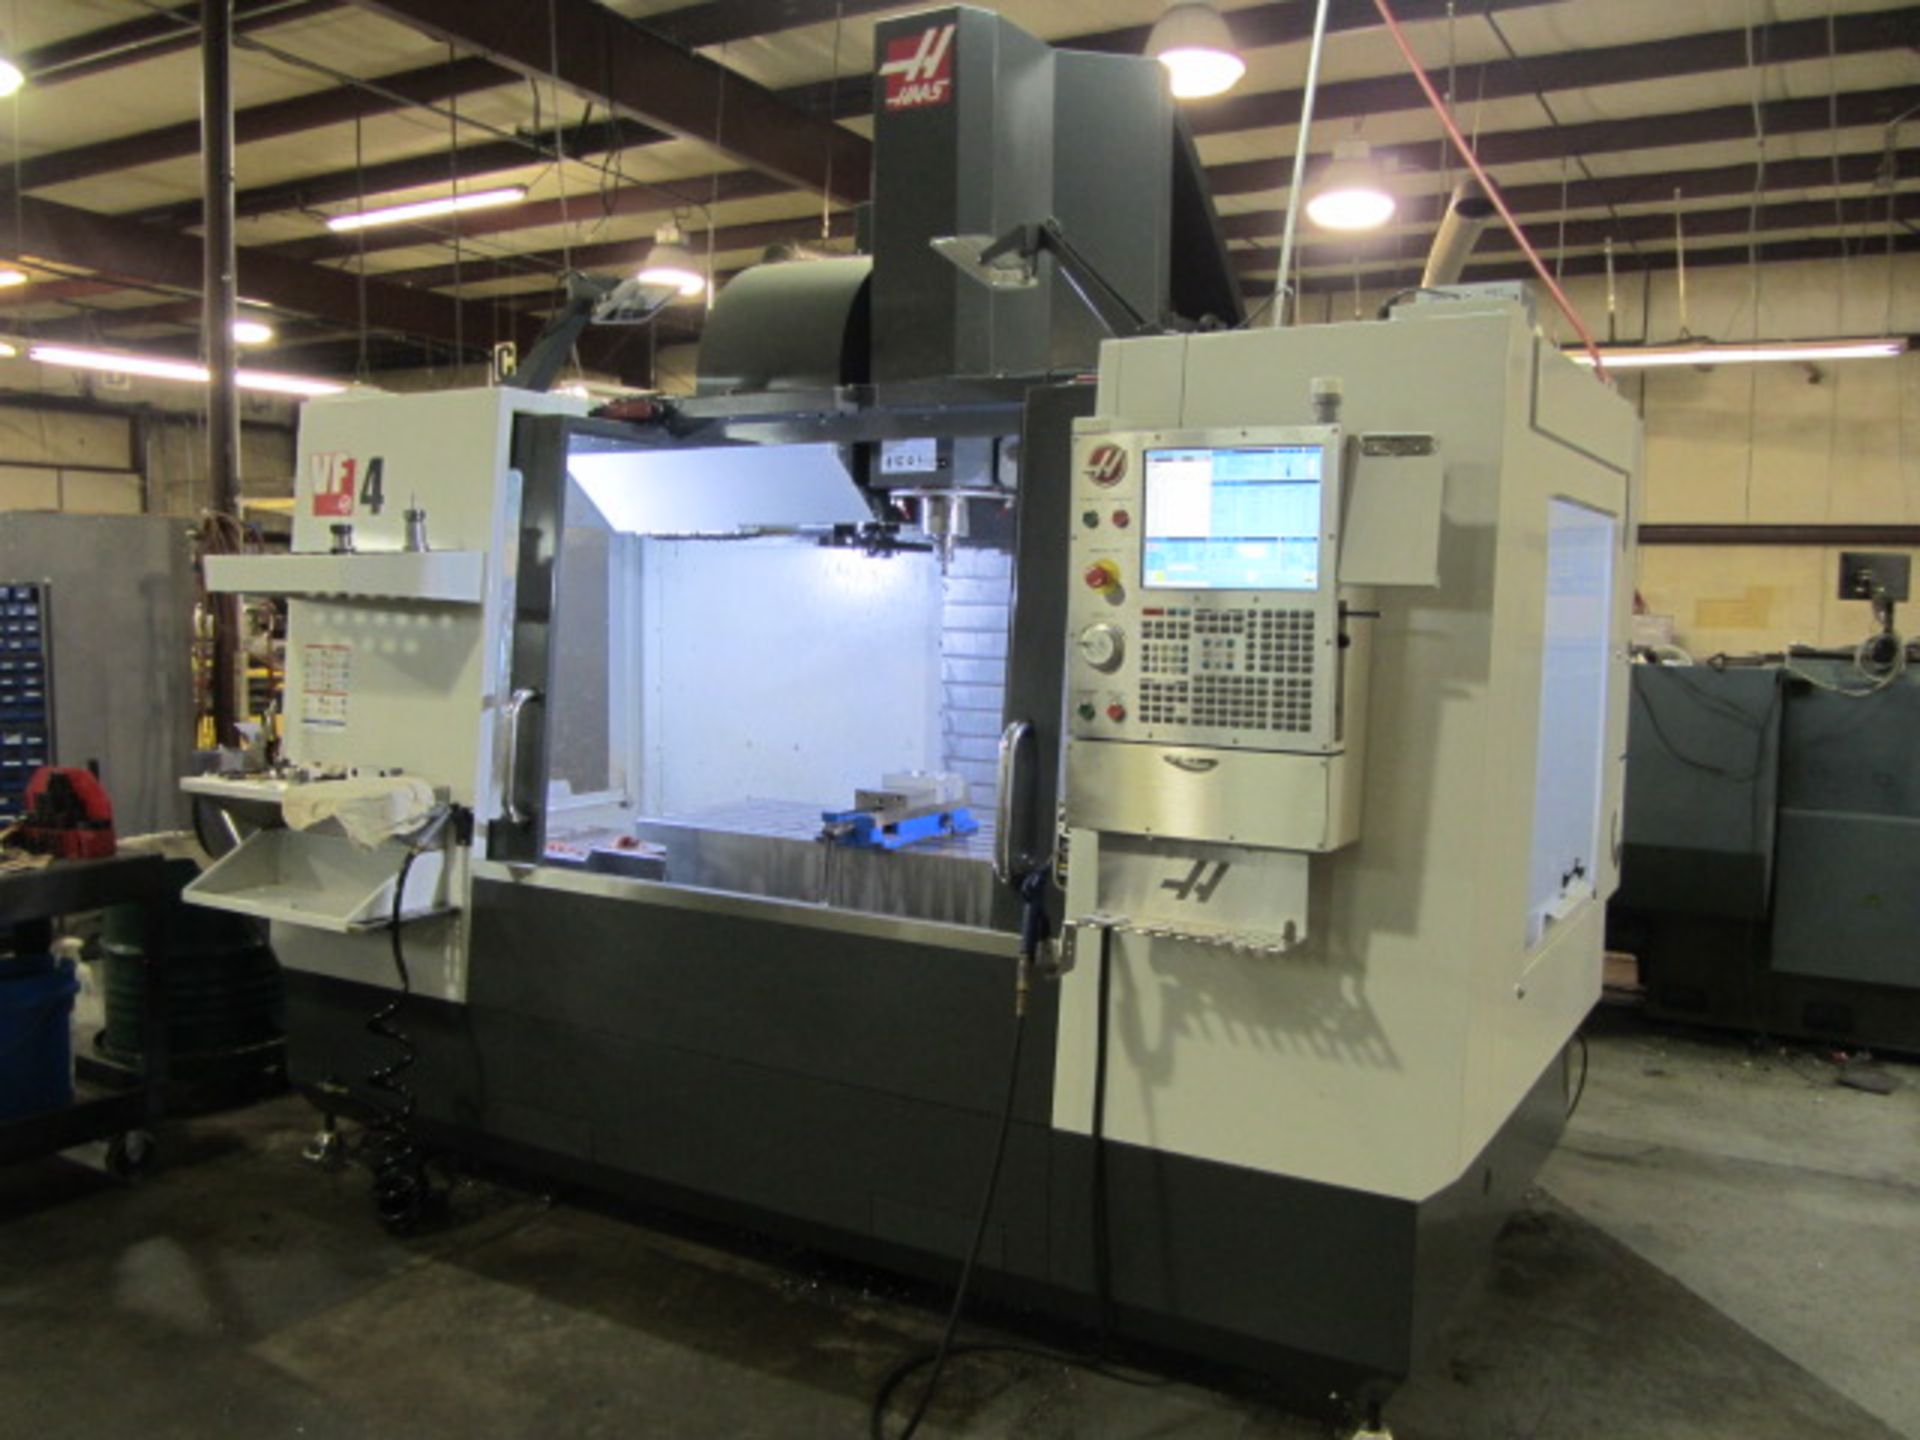 Haas VF-4 CNC Vertical Machining Center with 52'' x 20'' Table, #40 Taper Spindle Speeds to 8100 - Bild 2 aus 8